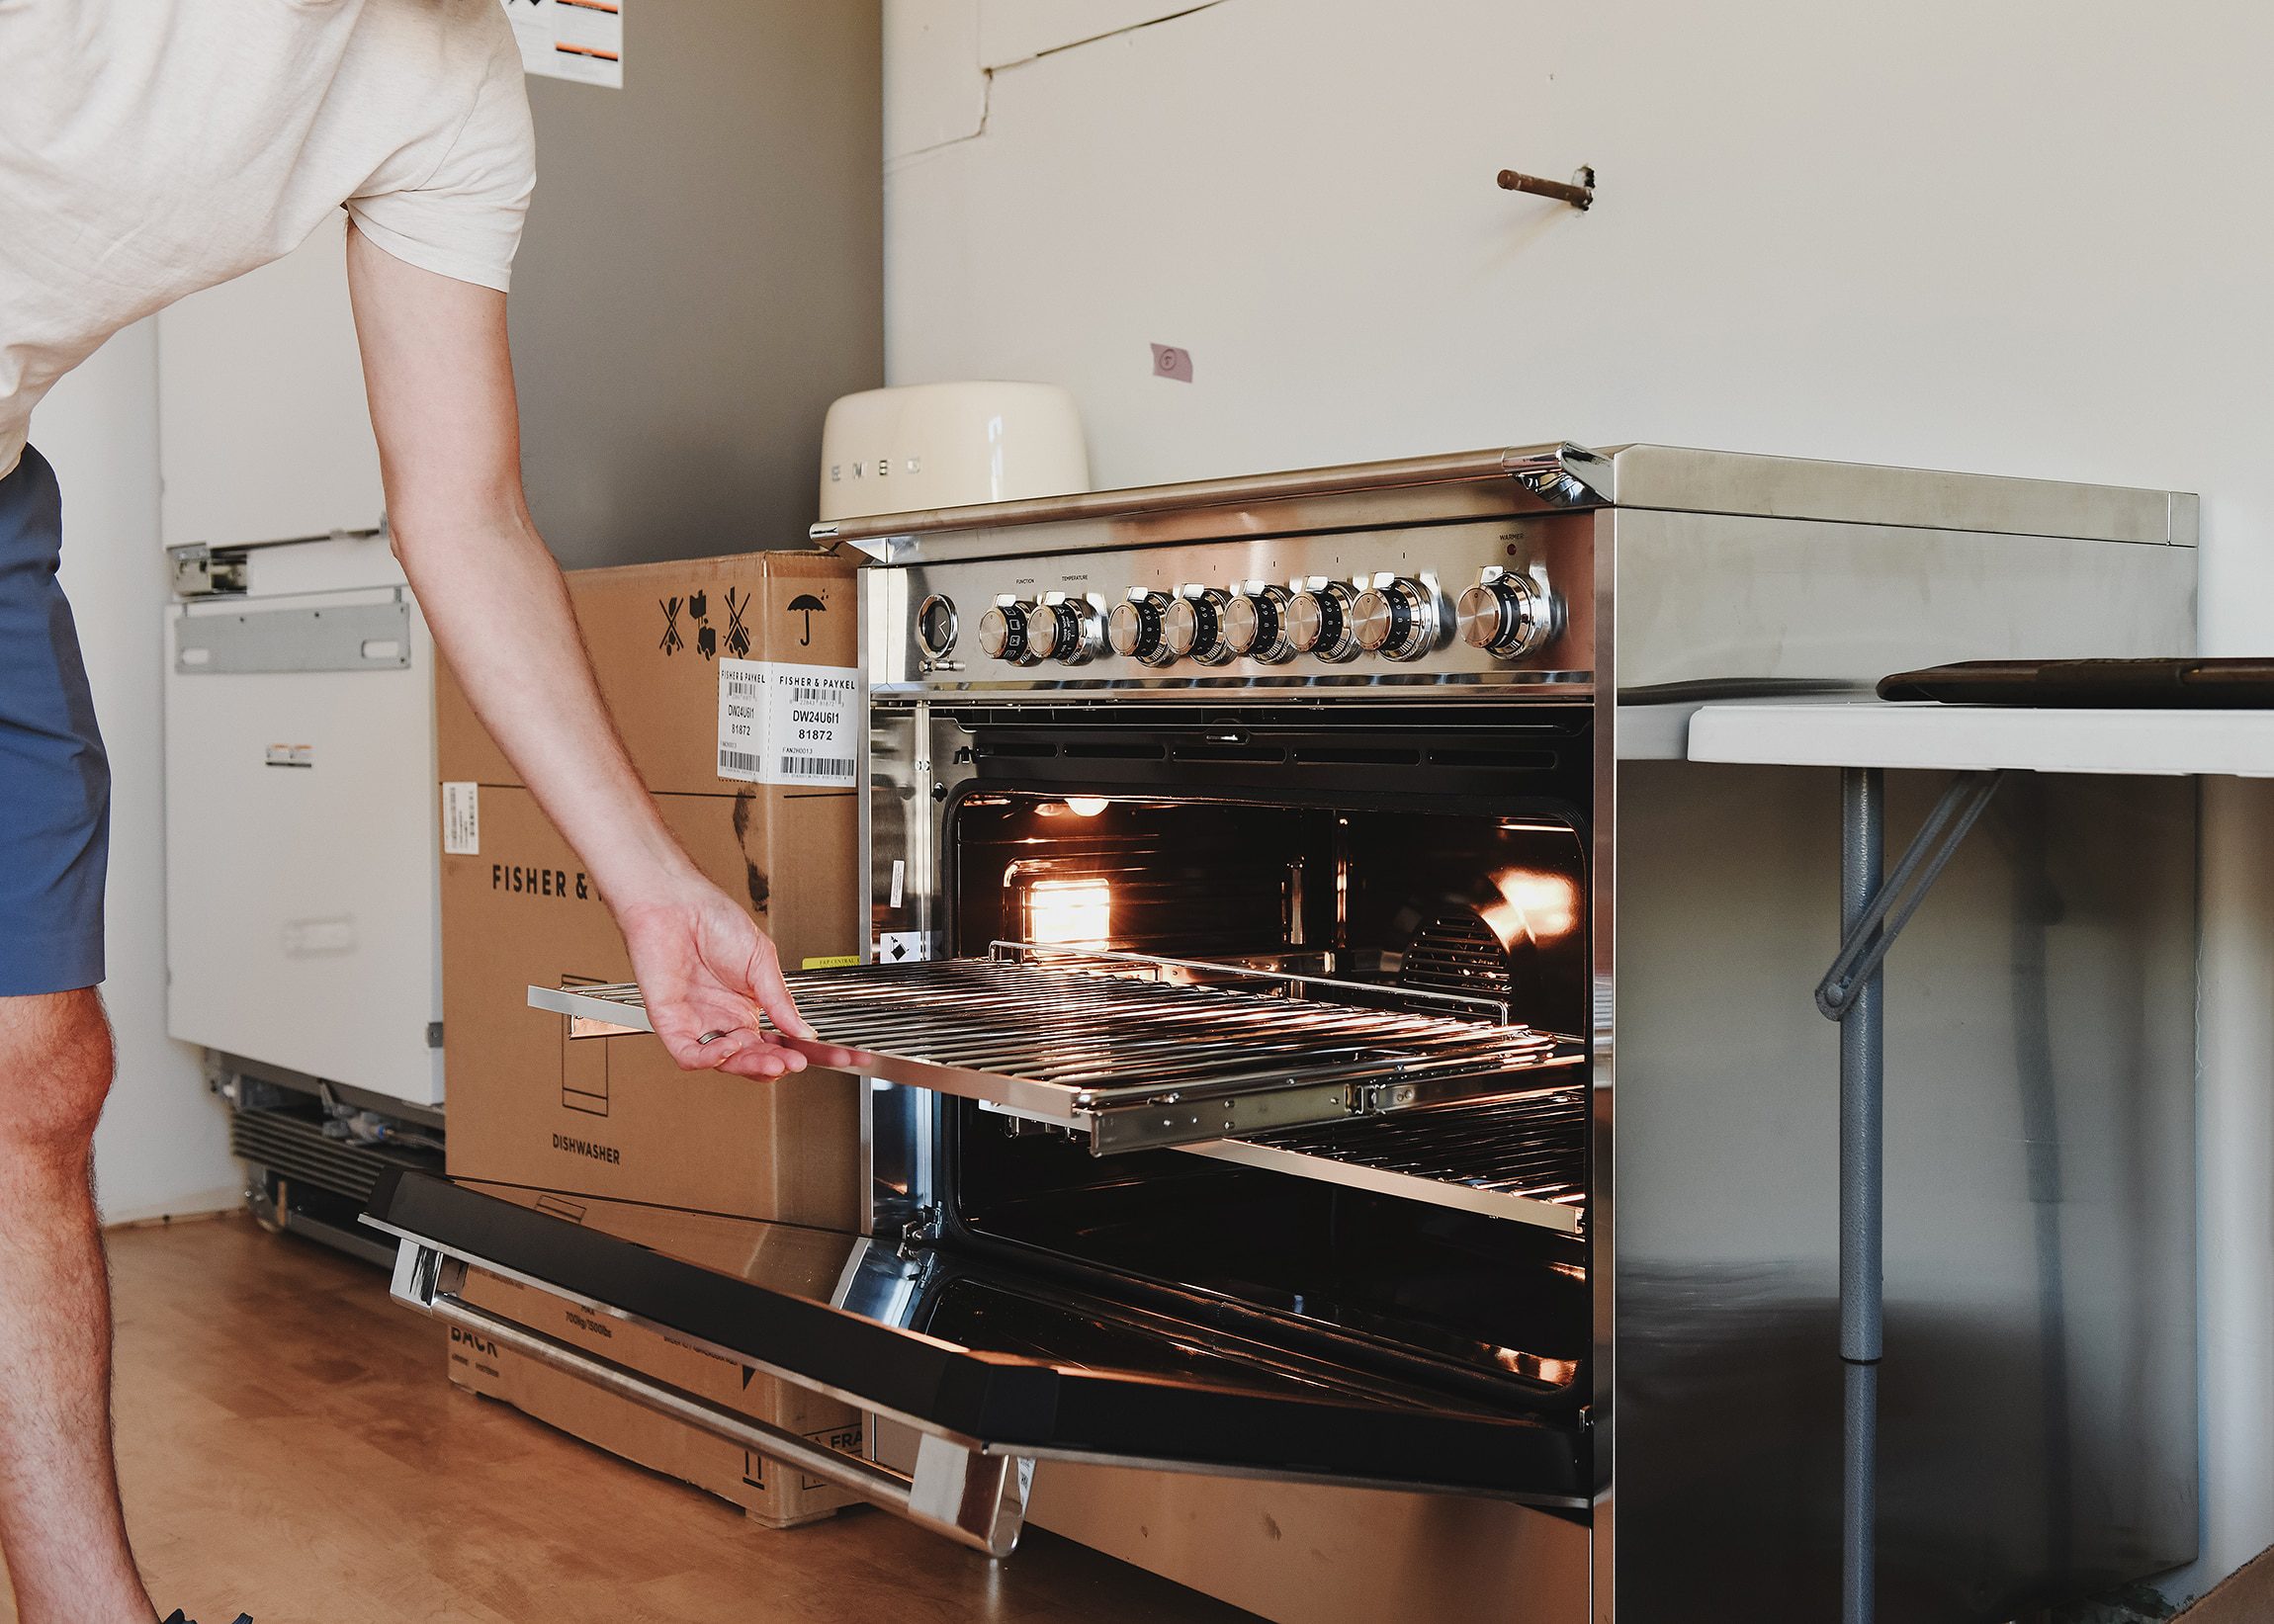 Our new 36" stainless steel Fisher & Paykel induction range // via Yellow Brick Home